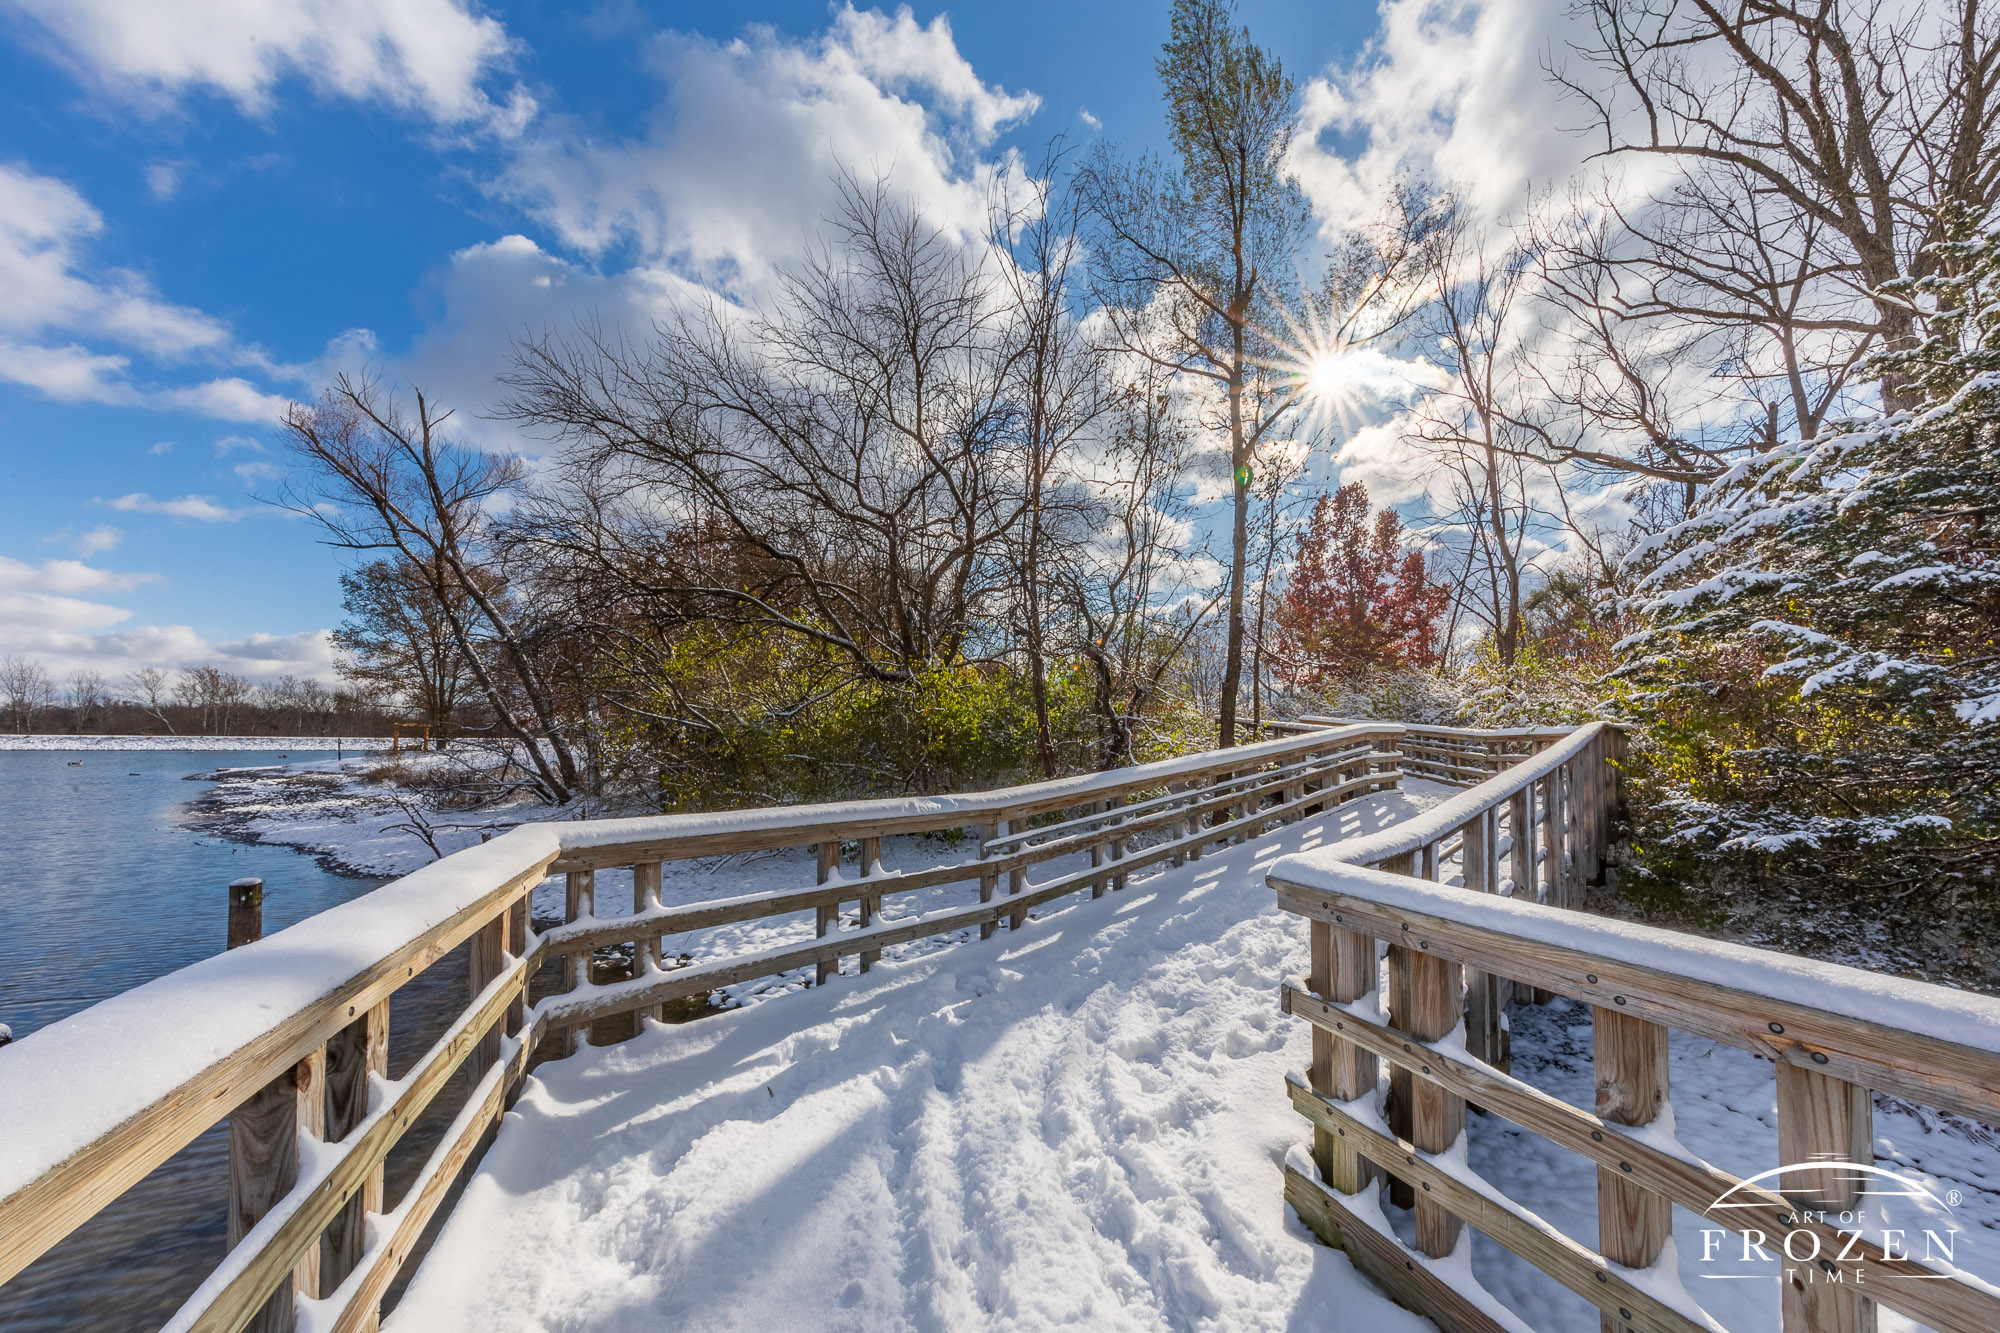 A snow covered walkway at Carriage Hill MetroPark sparkles as the sunlight refracts from fresh snow